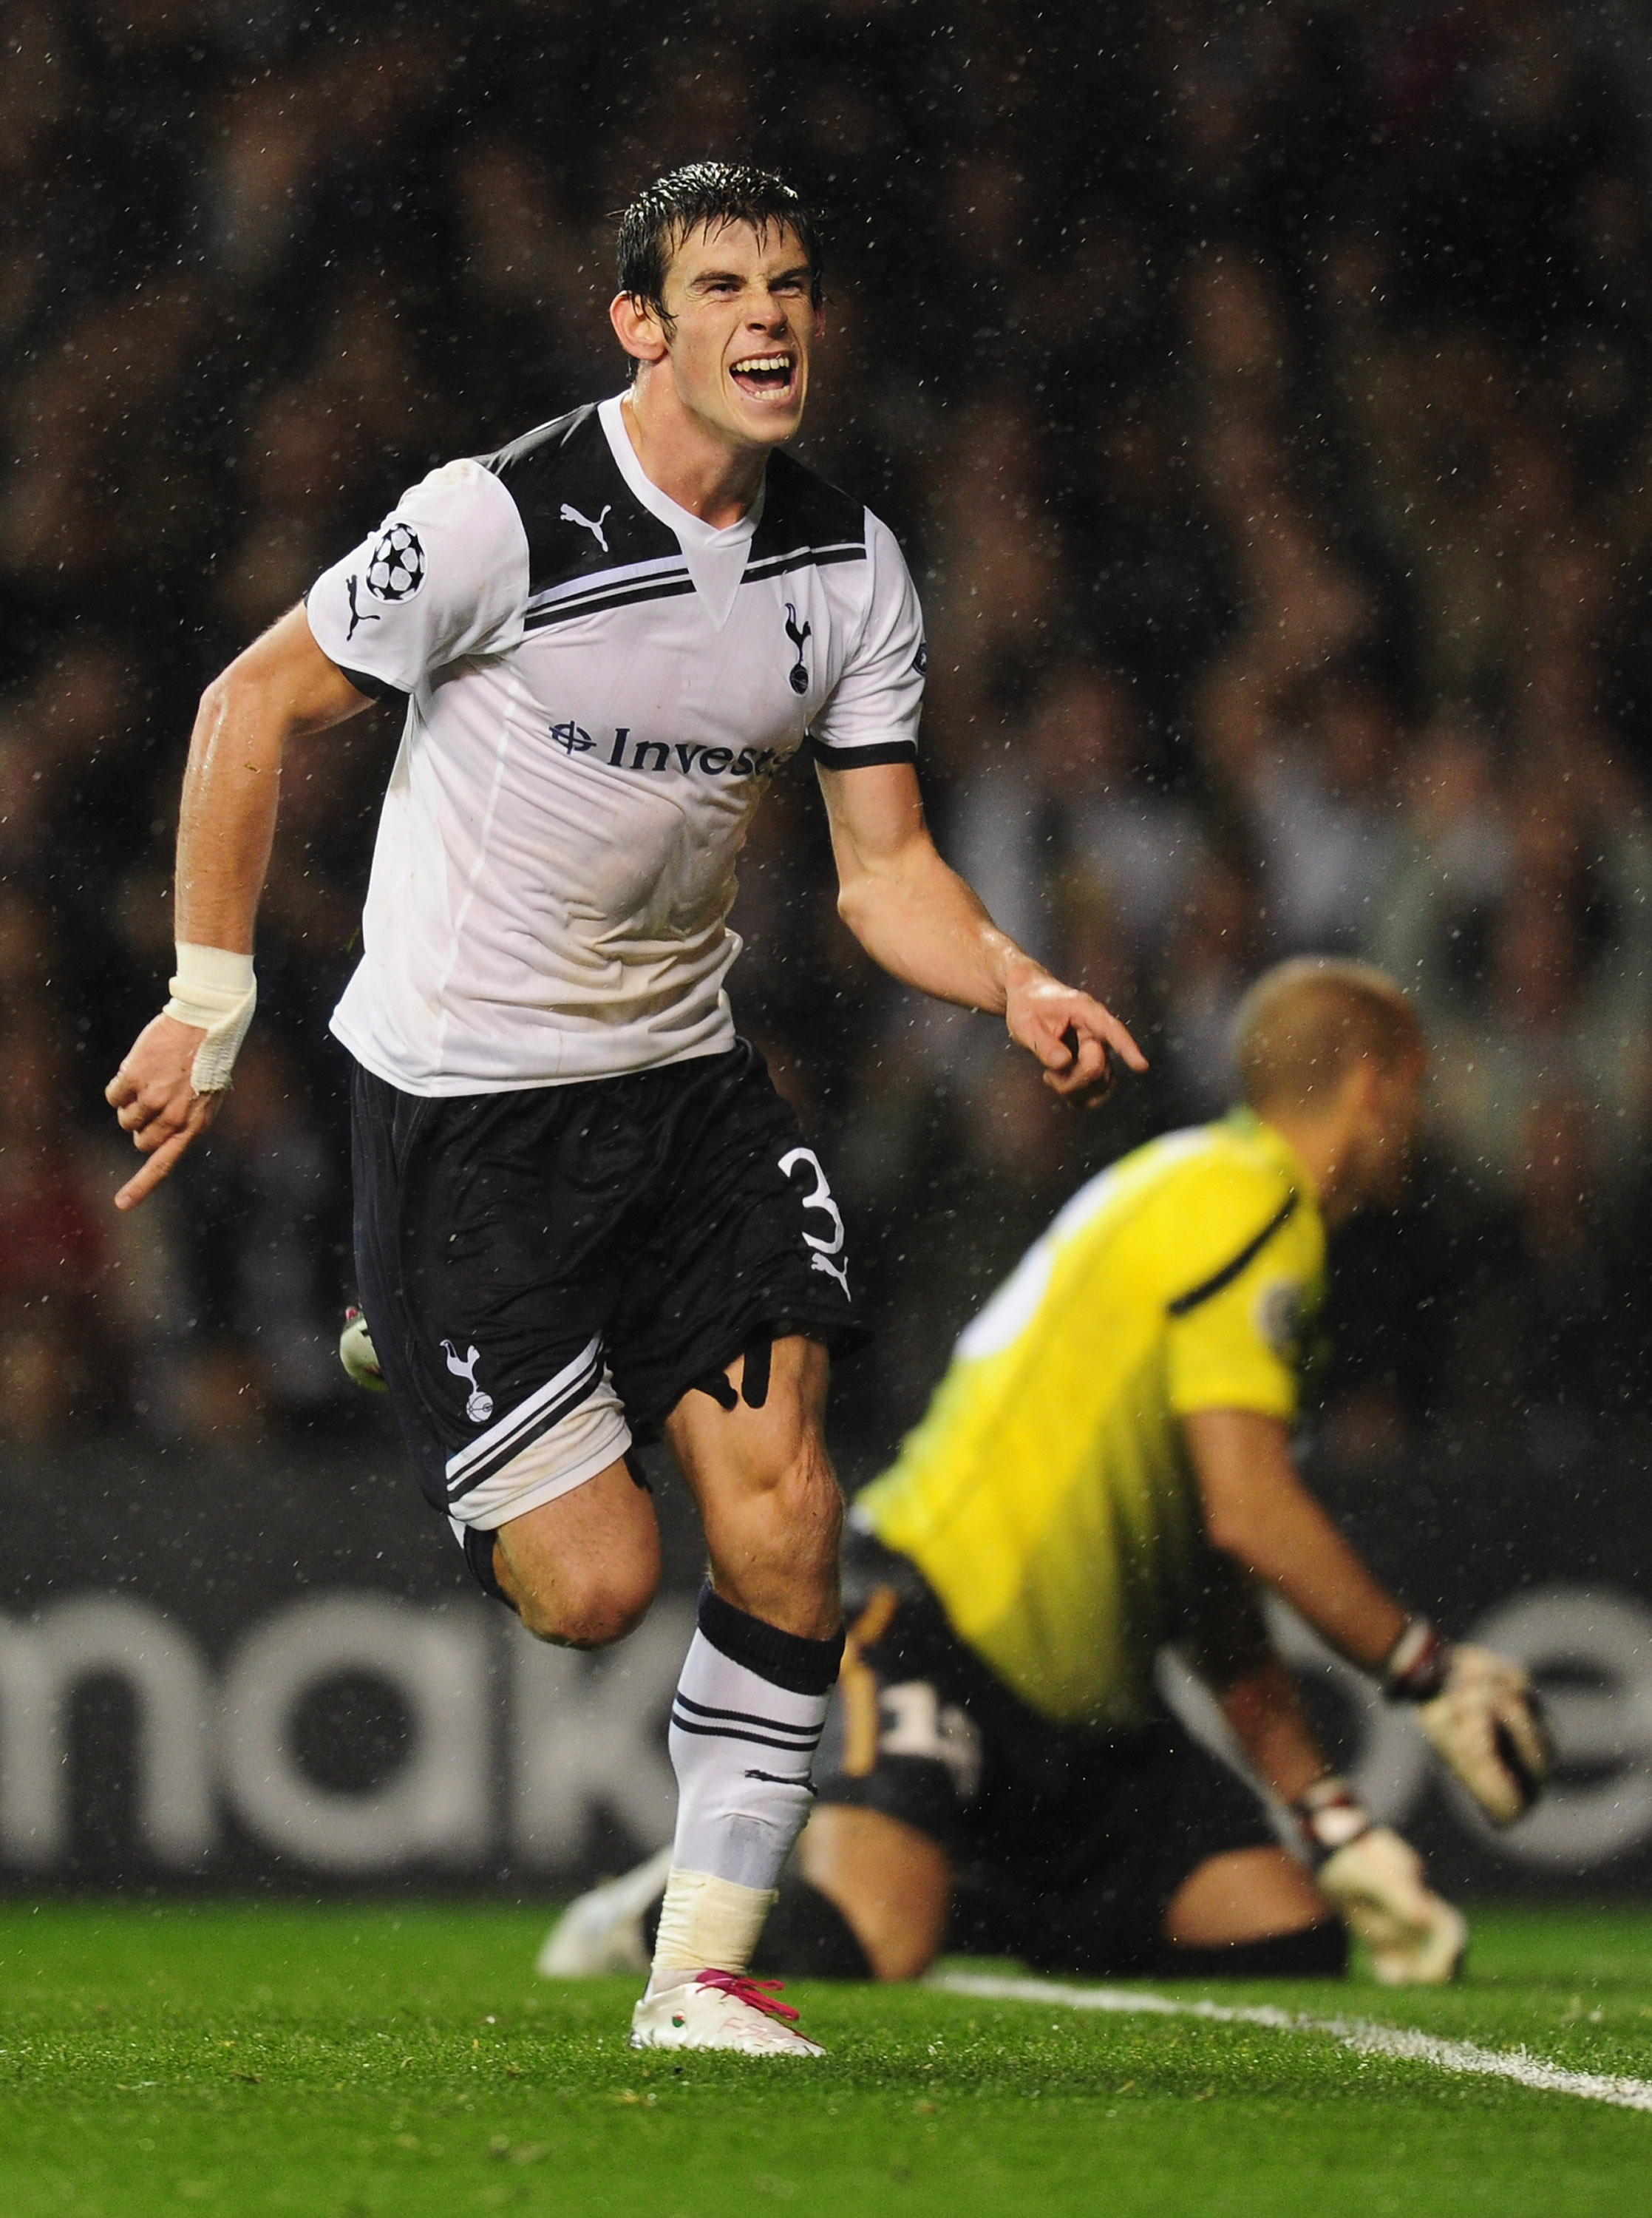 LONDON, ENGLAND - SEPTEMBER 29:  Gareth Bale of Tottenham celebrates after scoring during the  UEFA Champions League Group A match between Tottenham Hotspur and FC Twente at White Hart Lane on September 29, 2010 in London, England.  (Photo by Mike Hewitt/